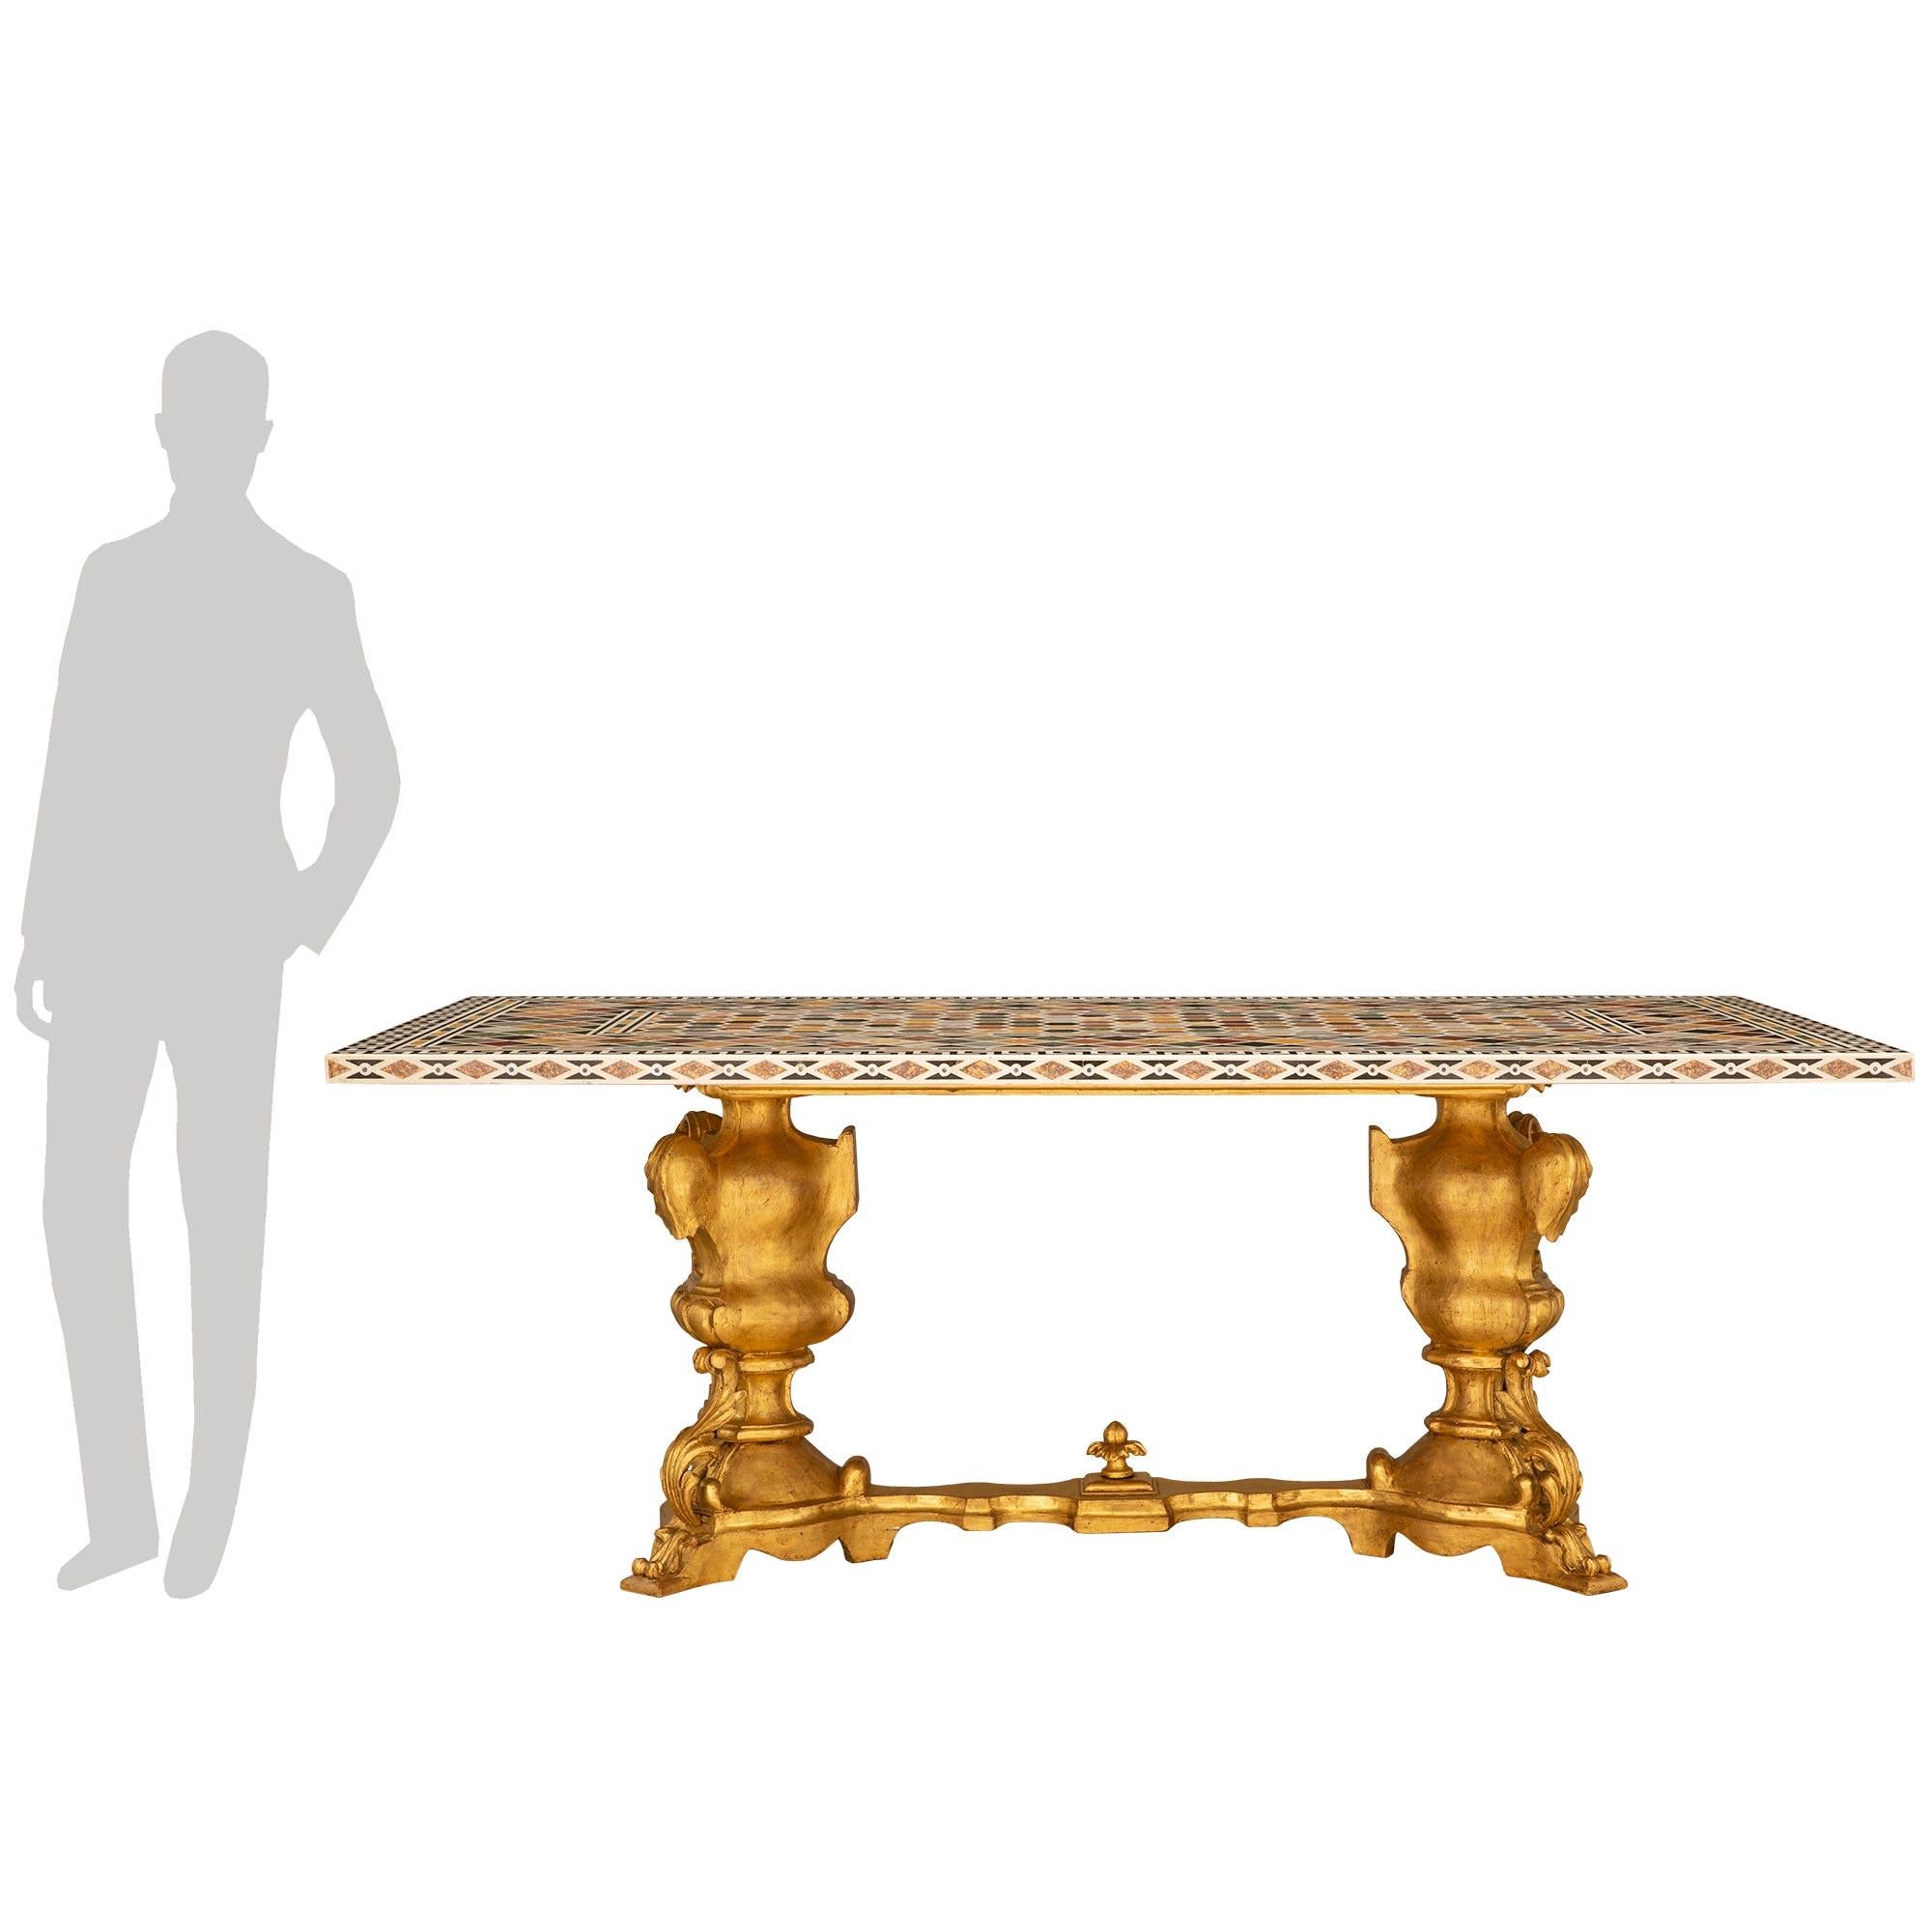 
A sensational and extremely decorative Italian 19th century Specimen marble and Giltwood center/dining table. The table is raised on a Baroque st. giltwood base with two baluster shaped supports decorating with scrolled acanthus leaves and gadroon